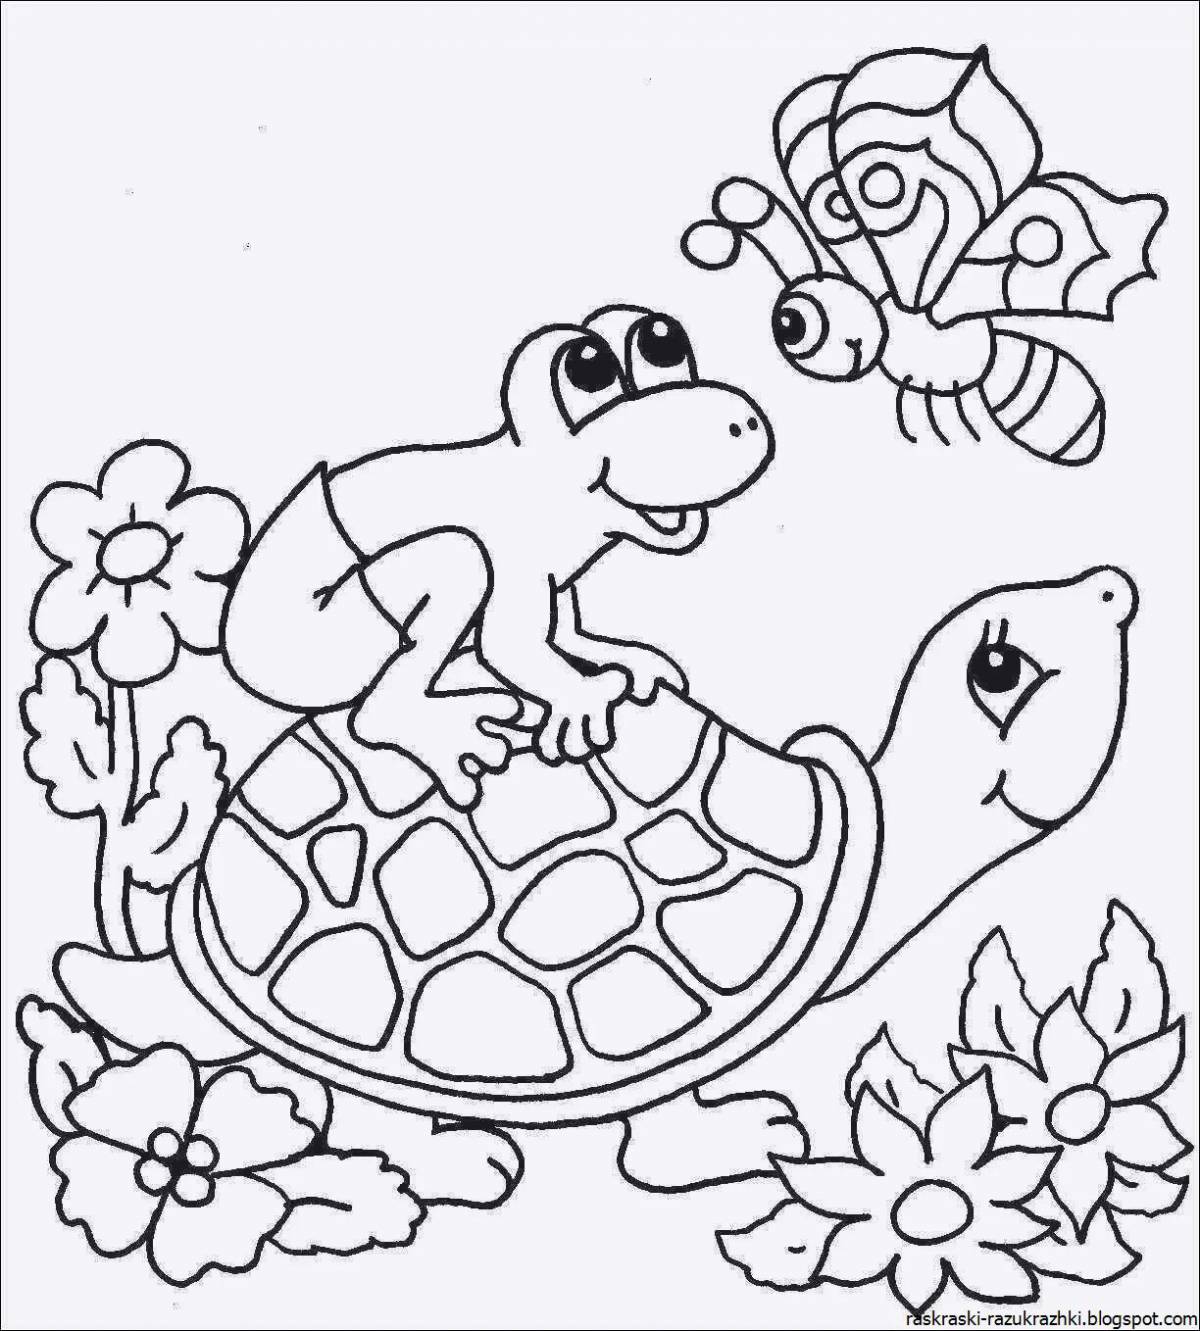 Radiant turtle coloring book for kids